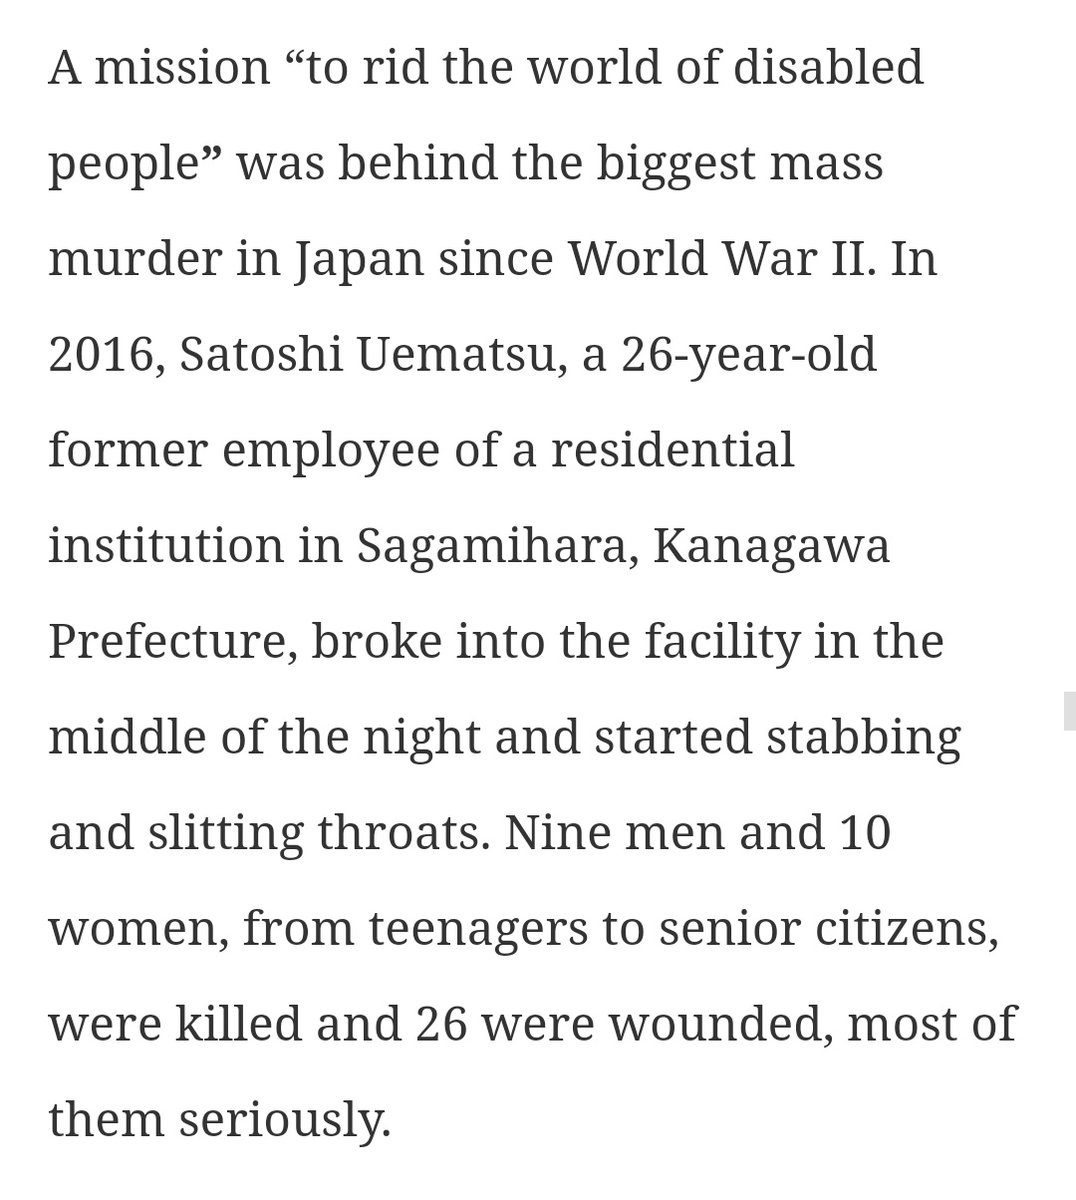 4. nazi germany. disabled people were the first victims of the holocaust. we were killed in gas chambers, injection, starvation, experimentation, and exposure. 2016, in japan, the biggest mass murder since world war II was a mission to "rid the world of disabled people."